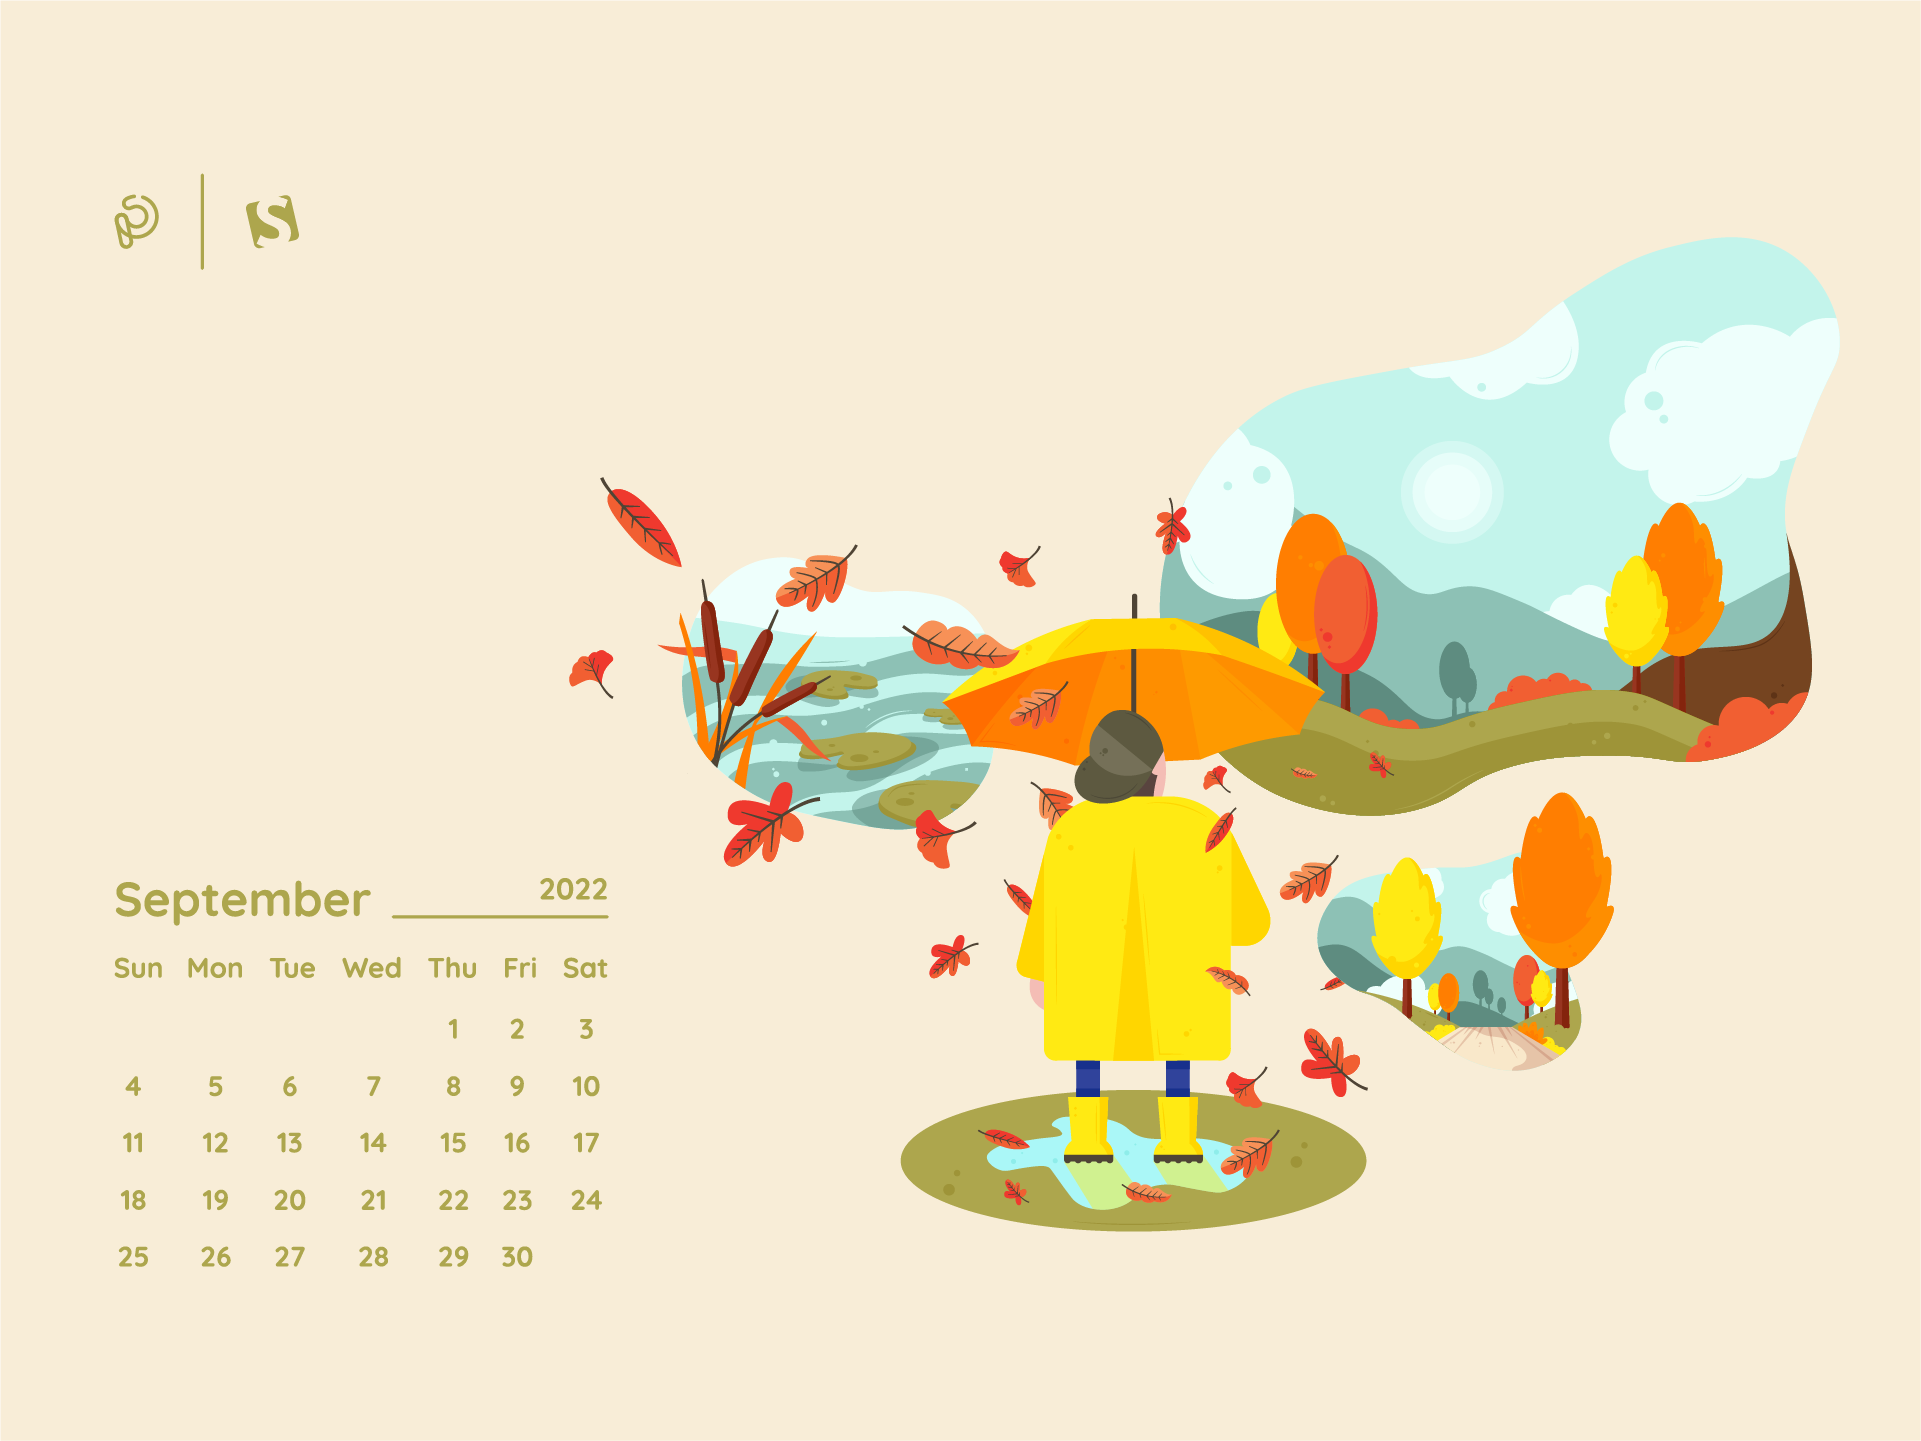 Download free vector of Mountain September monthly calendar iPhone wallpaper  vector by Hein abou in 2023  Calendar wallpaper Iphone wallpaper vector September  wallpaper